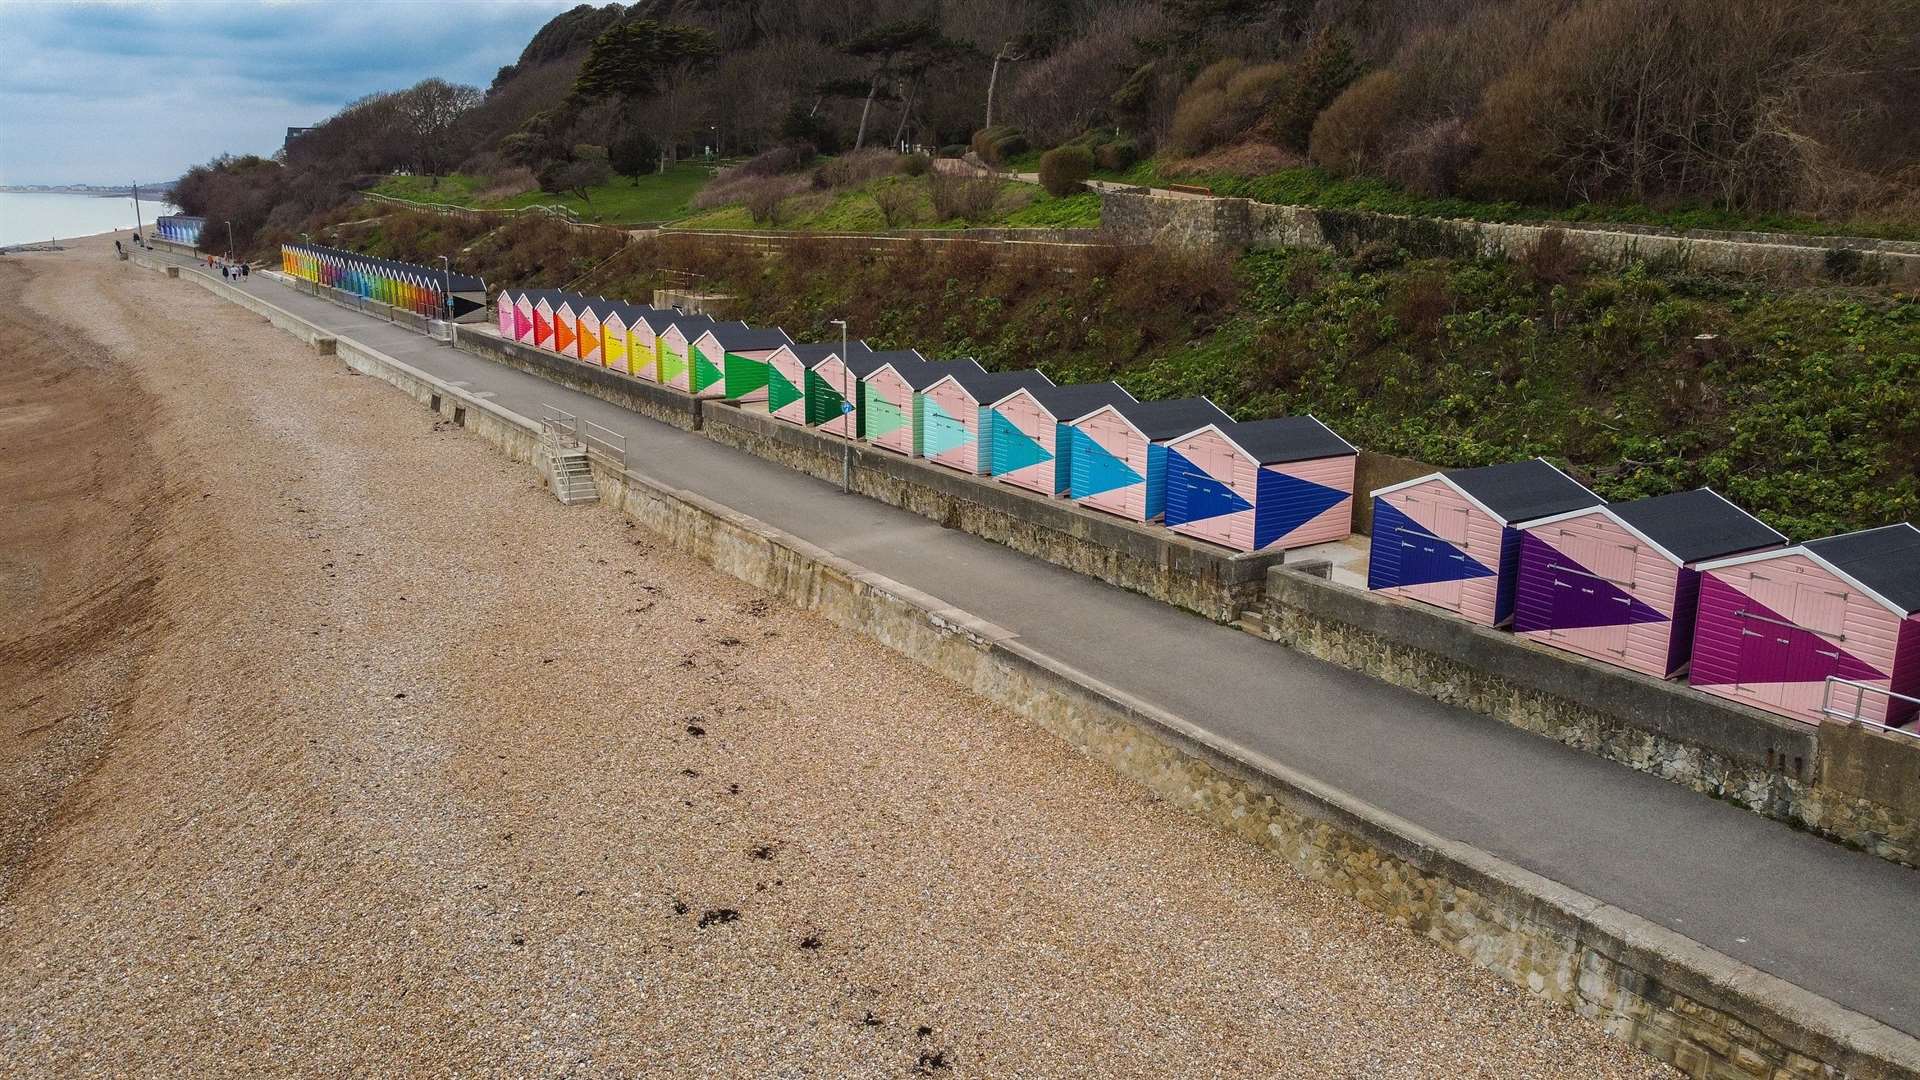 Folkestone's beach huts, by Rana Begum and commissioned for Creative Folkestone Triennial 2021 in partnership with Folkestone and Hythe District Council. Photo by Tom Bishop